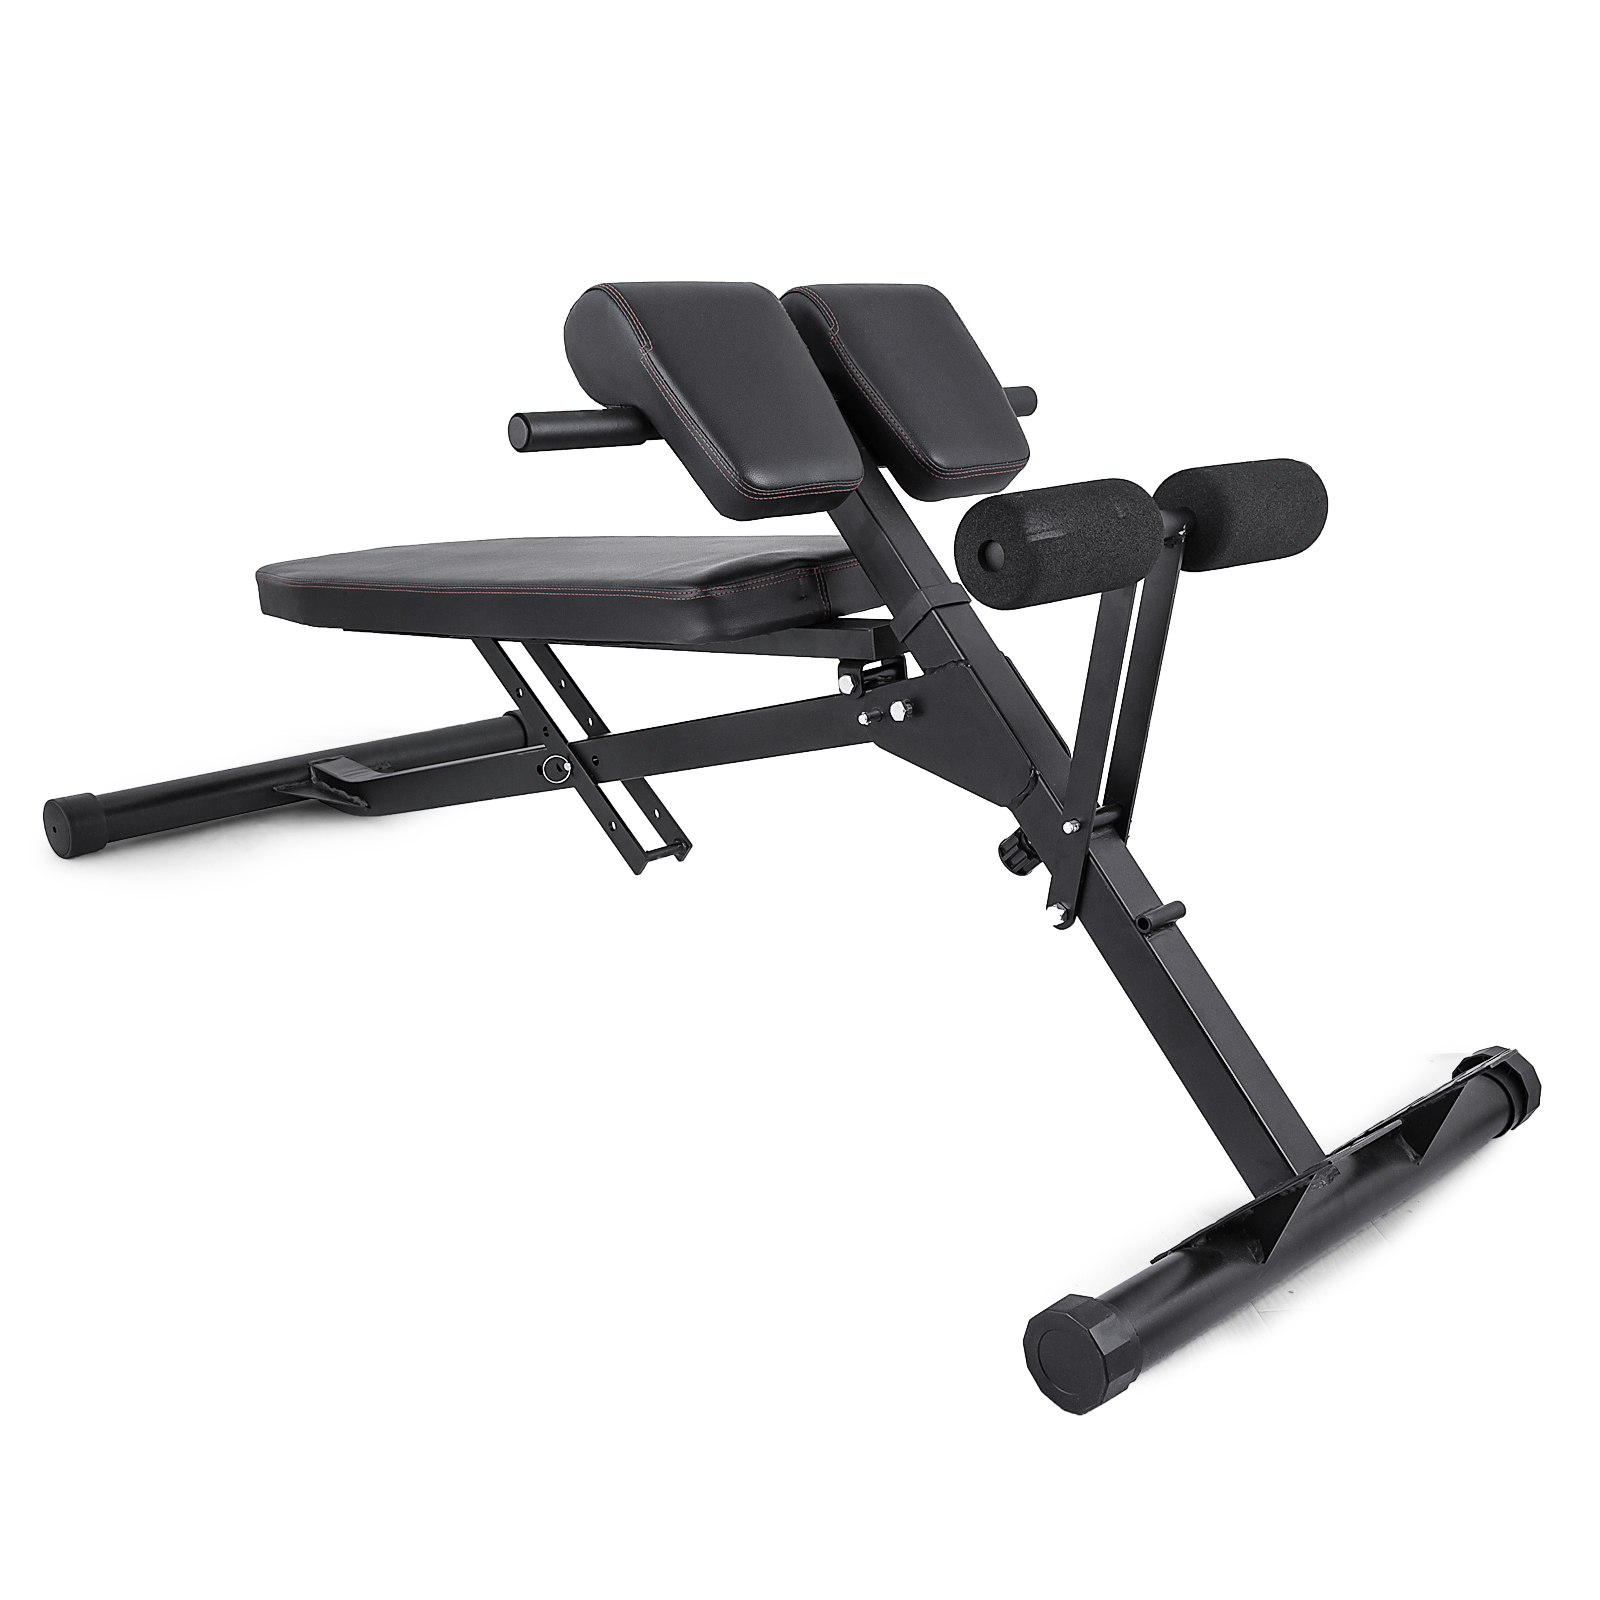 Fitness Hyper Extension Bench Roman Chair Sit Up Crunches